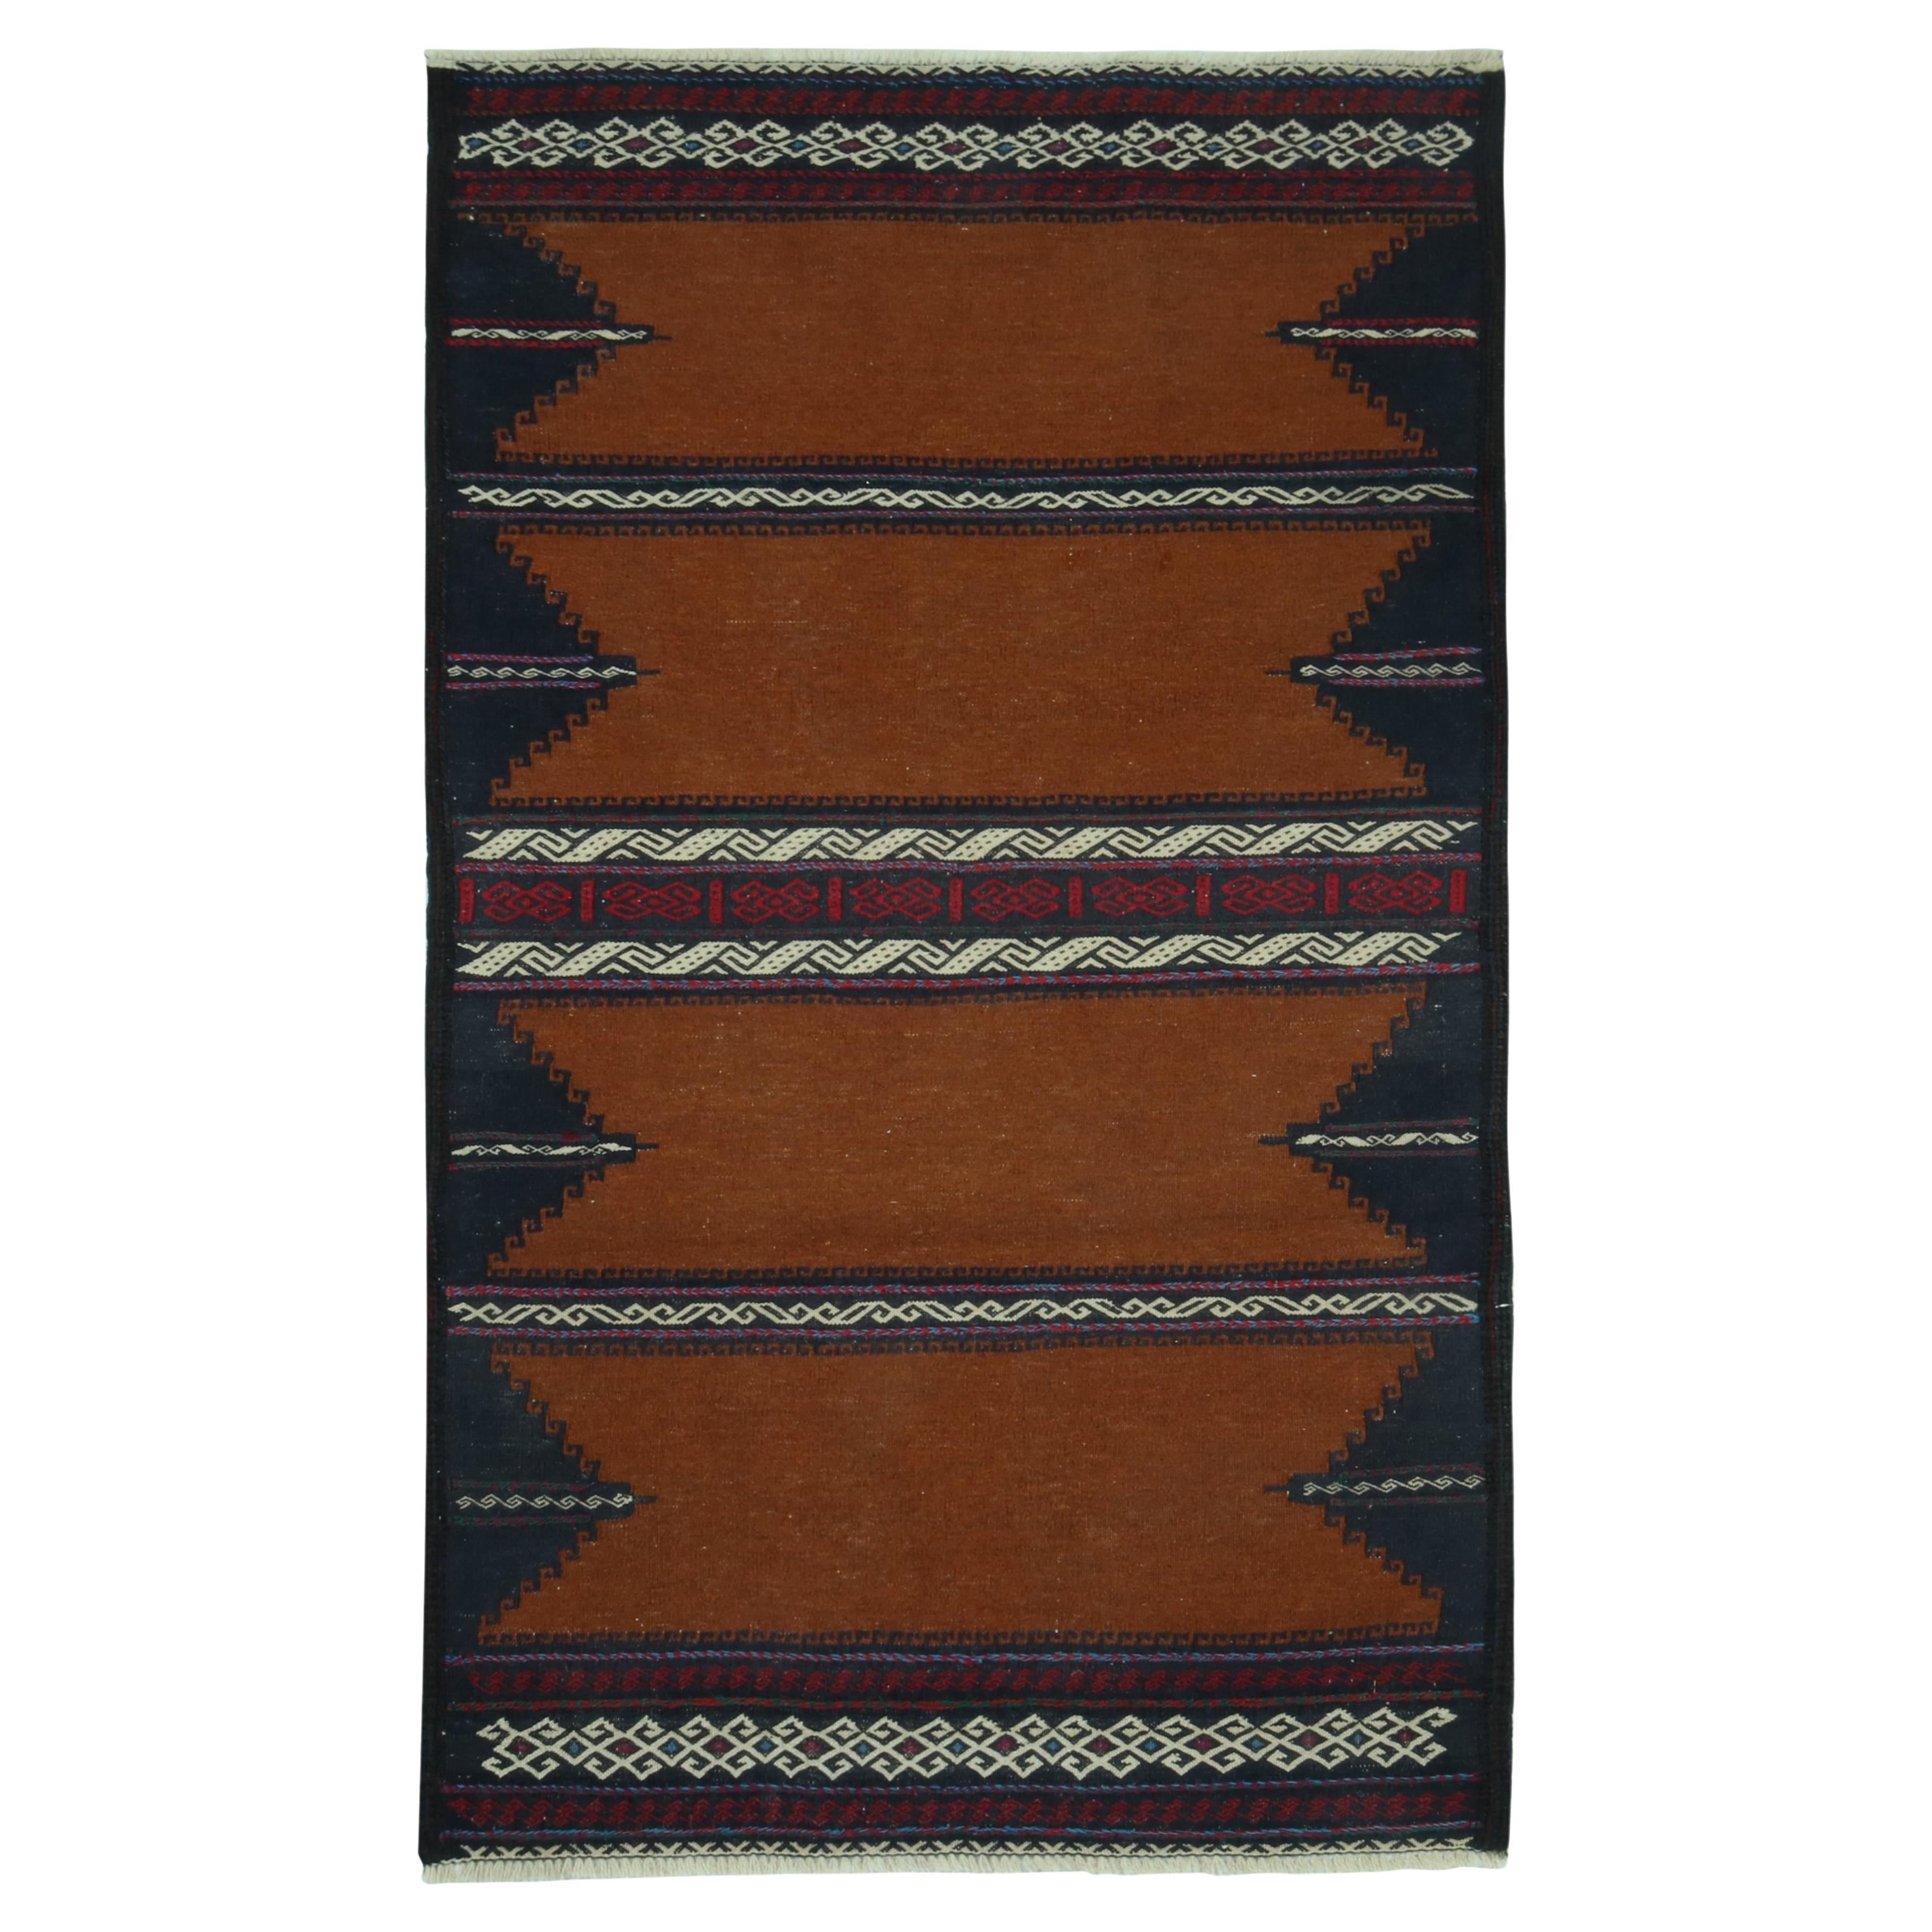 Vintage Sofreh Persian Kilim in Brown with Geometric Patterns, by Rug & Kilim For Sale